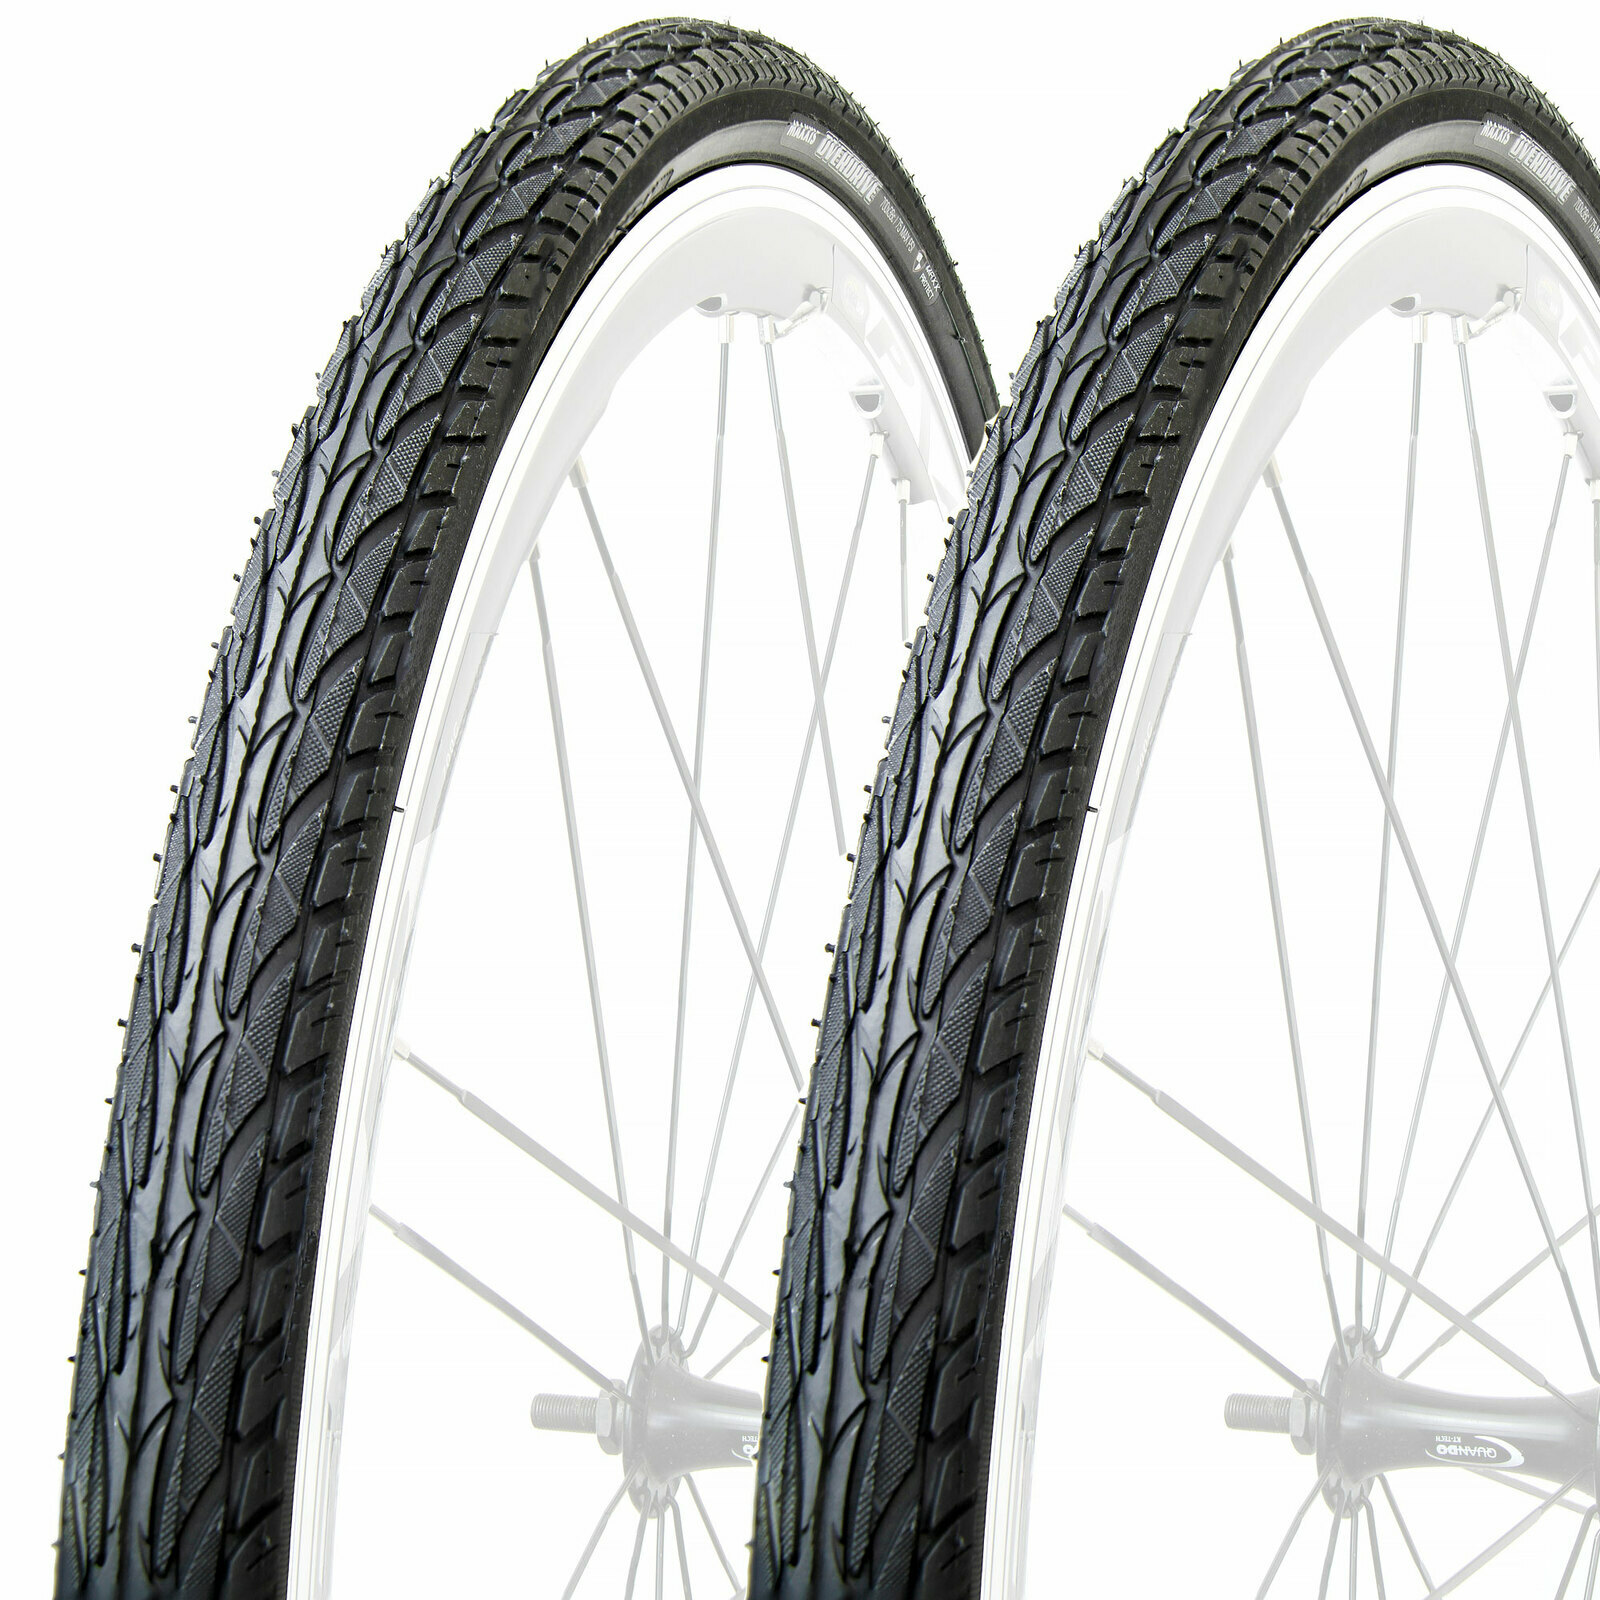 2 x MAXXIS Overdrive Bike Tyre 700x38 wire 60 TPI